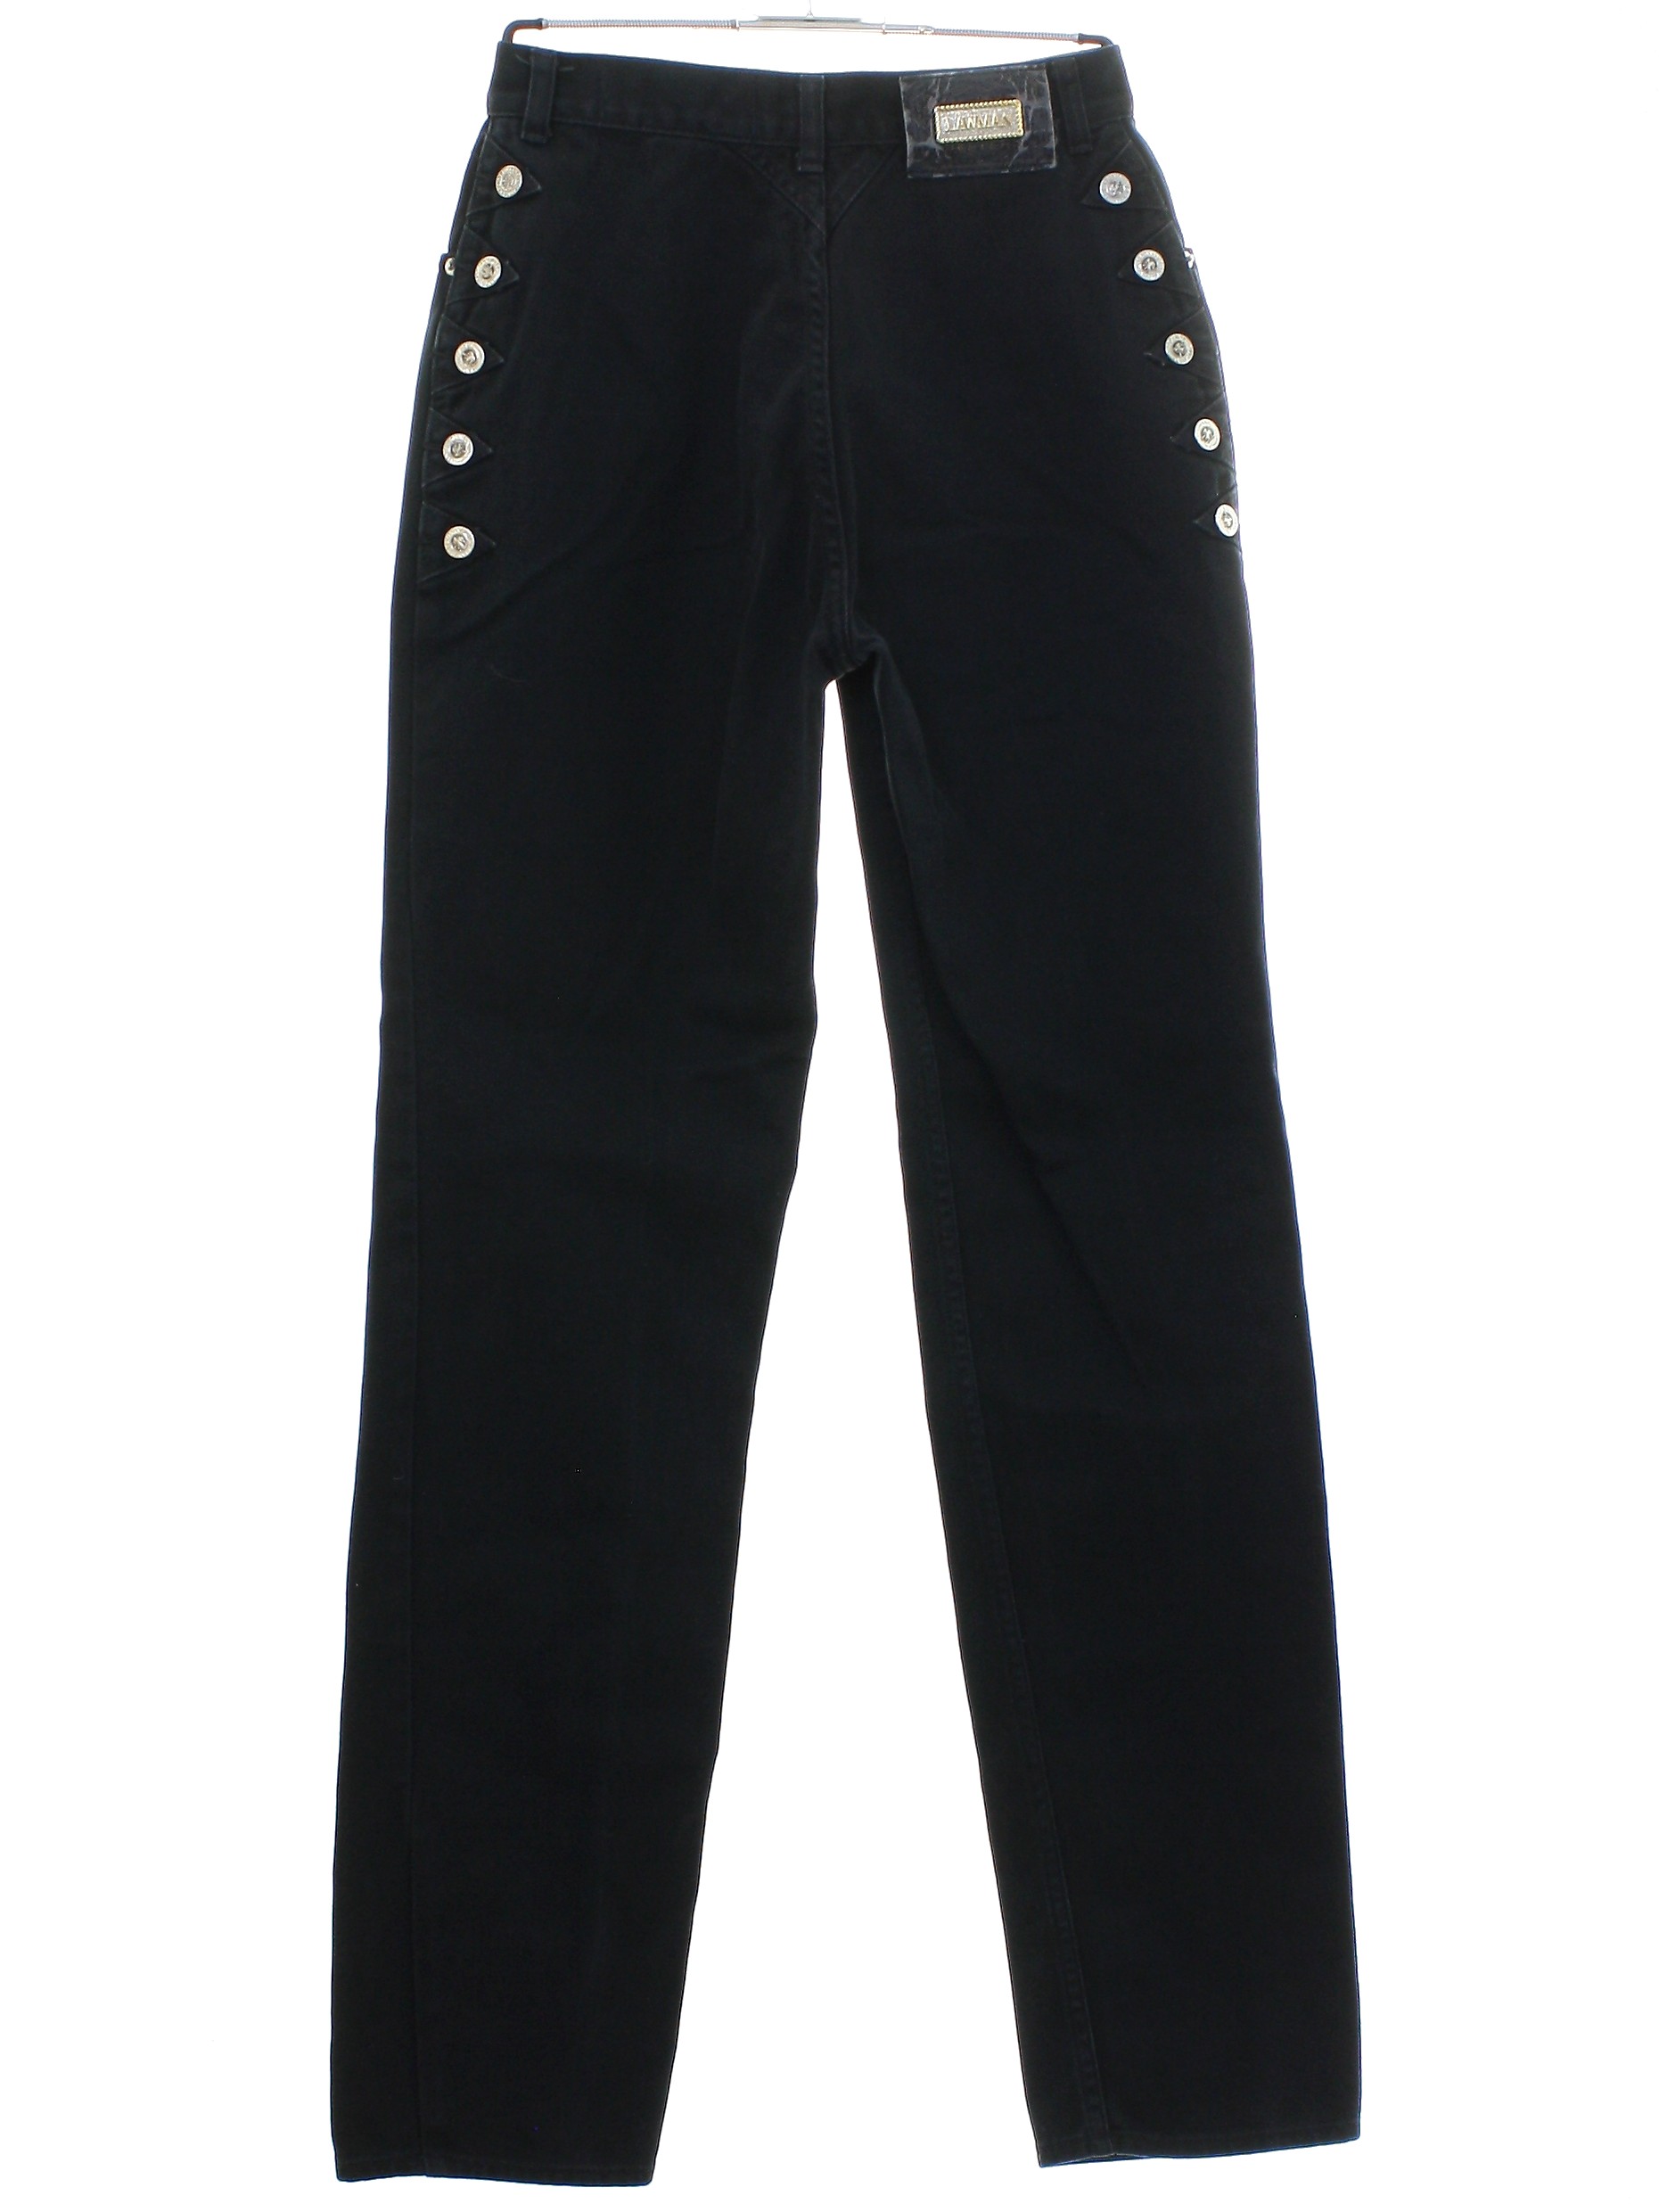 Retro 80's Pants: Late 80s or early 90s -Lawman- Womens faded black ...